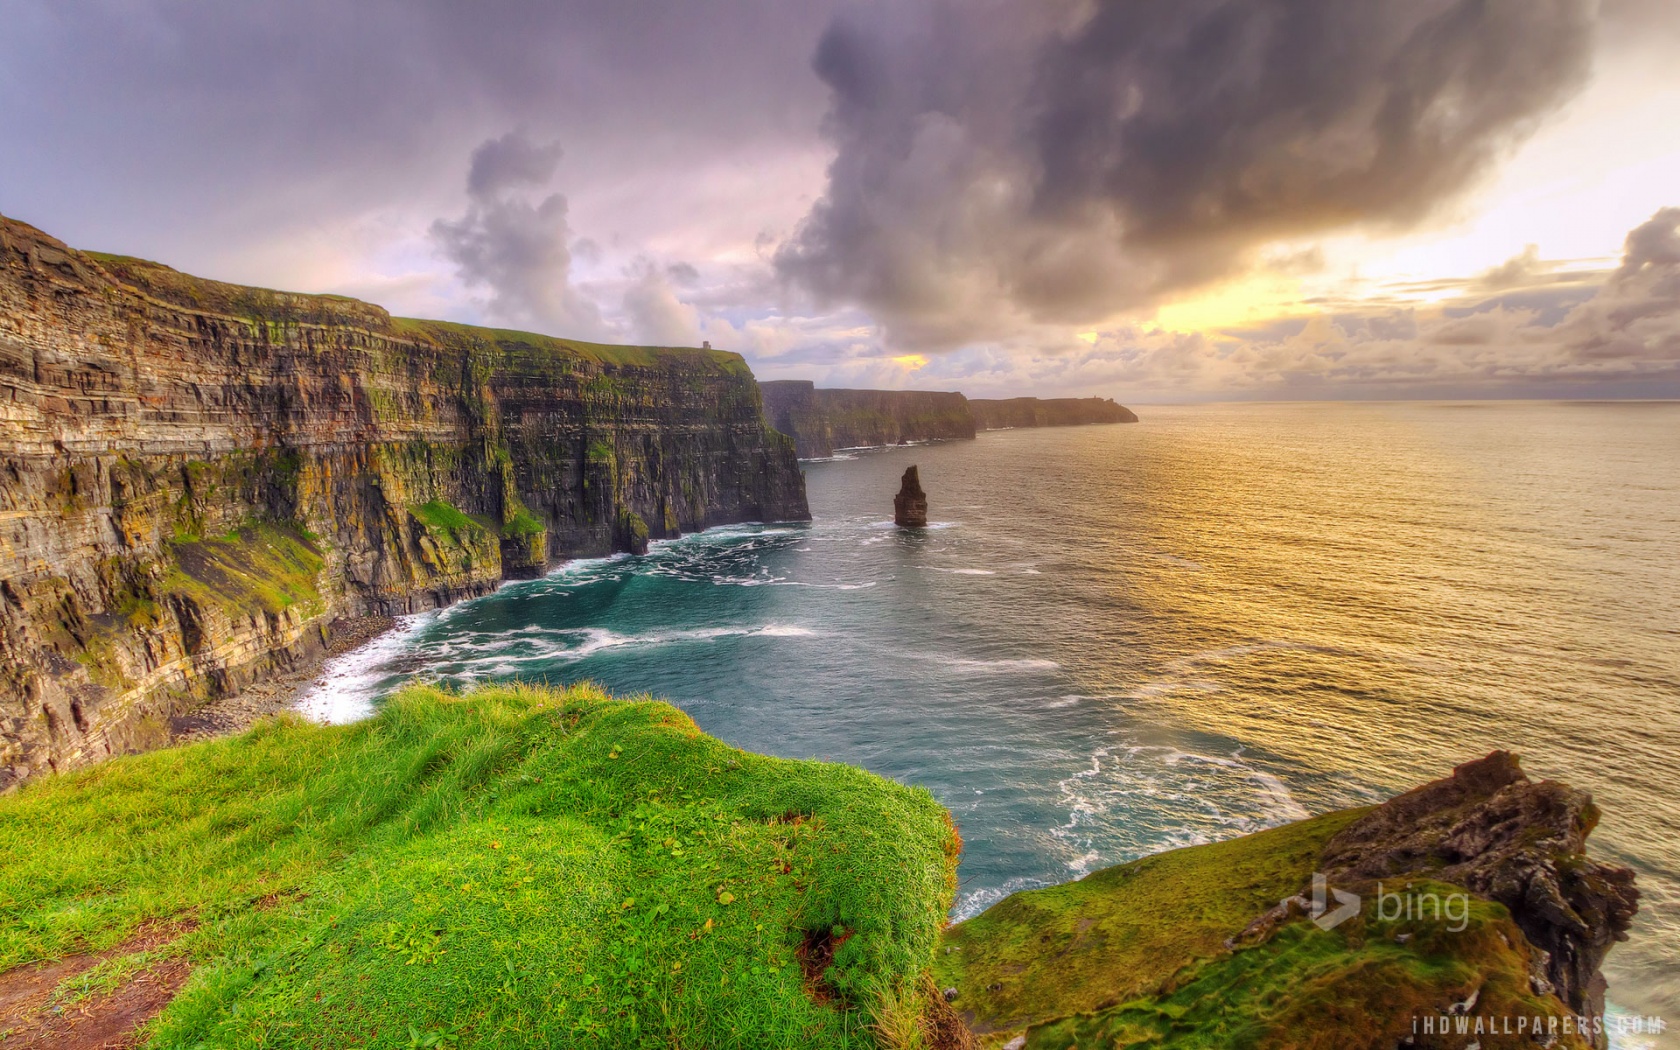  Moher at sunset County Clare Ireland HD Wallpaper   iHD Wallpapers